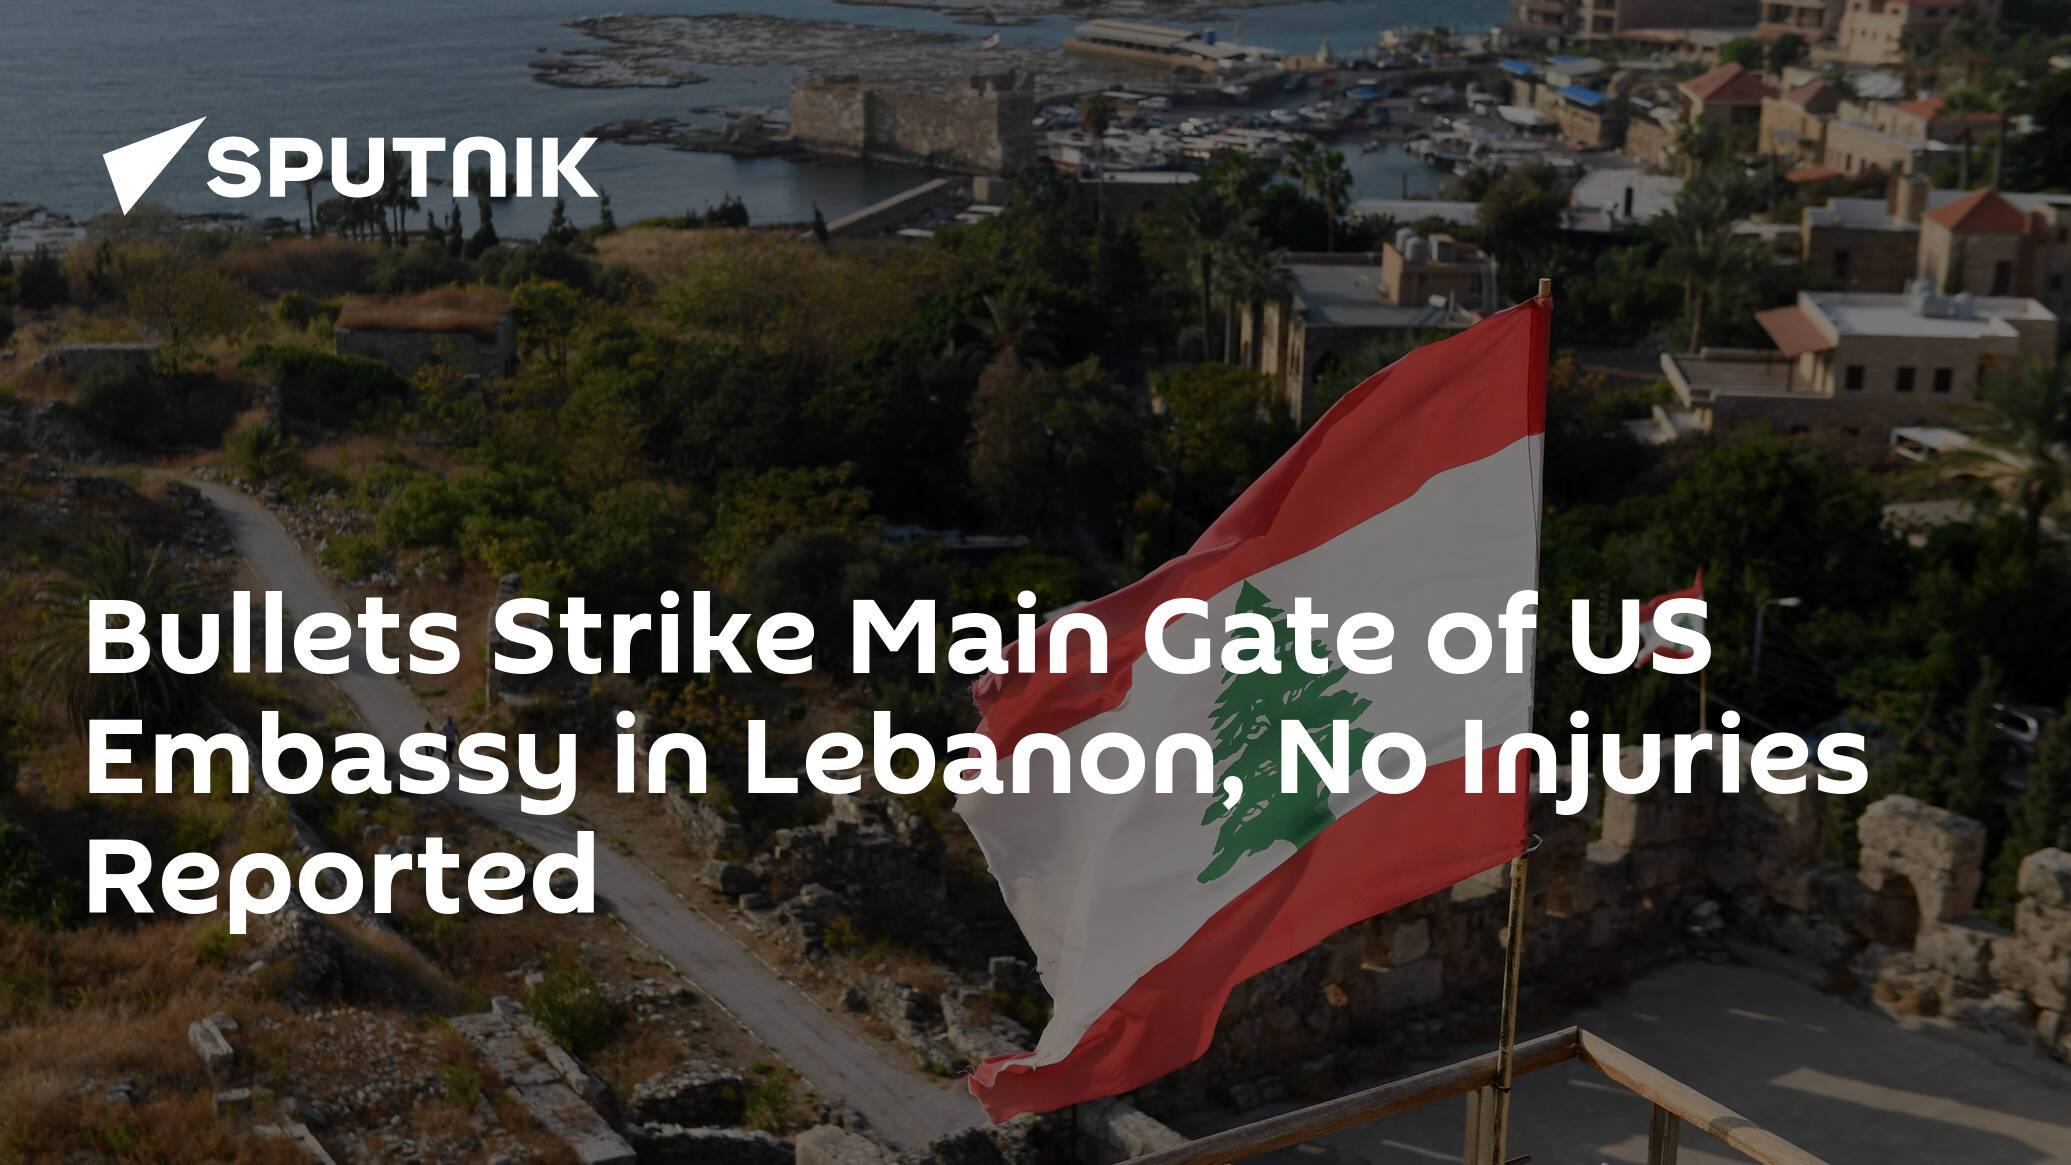 Bullets Strike Main Gate of US Embassy in Lebanon, No Injuries Reported